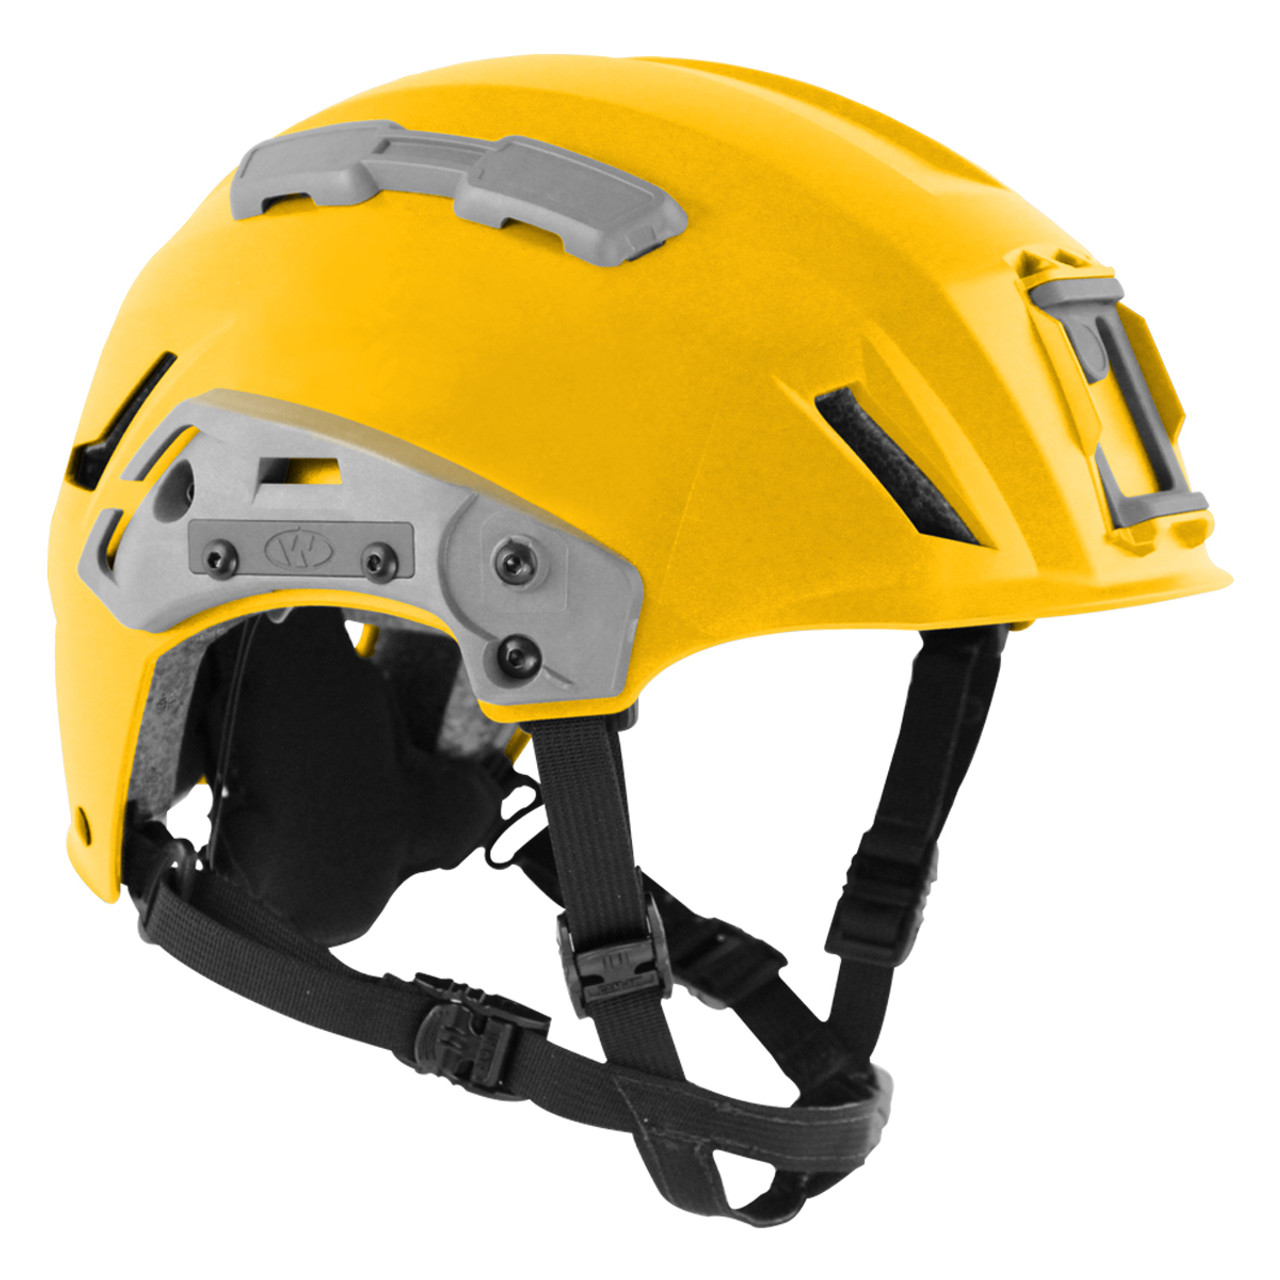 Team Wendy EXFIL SAR Tactical Helmet Curtis Tools for Heroes